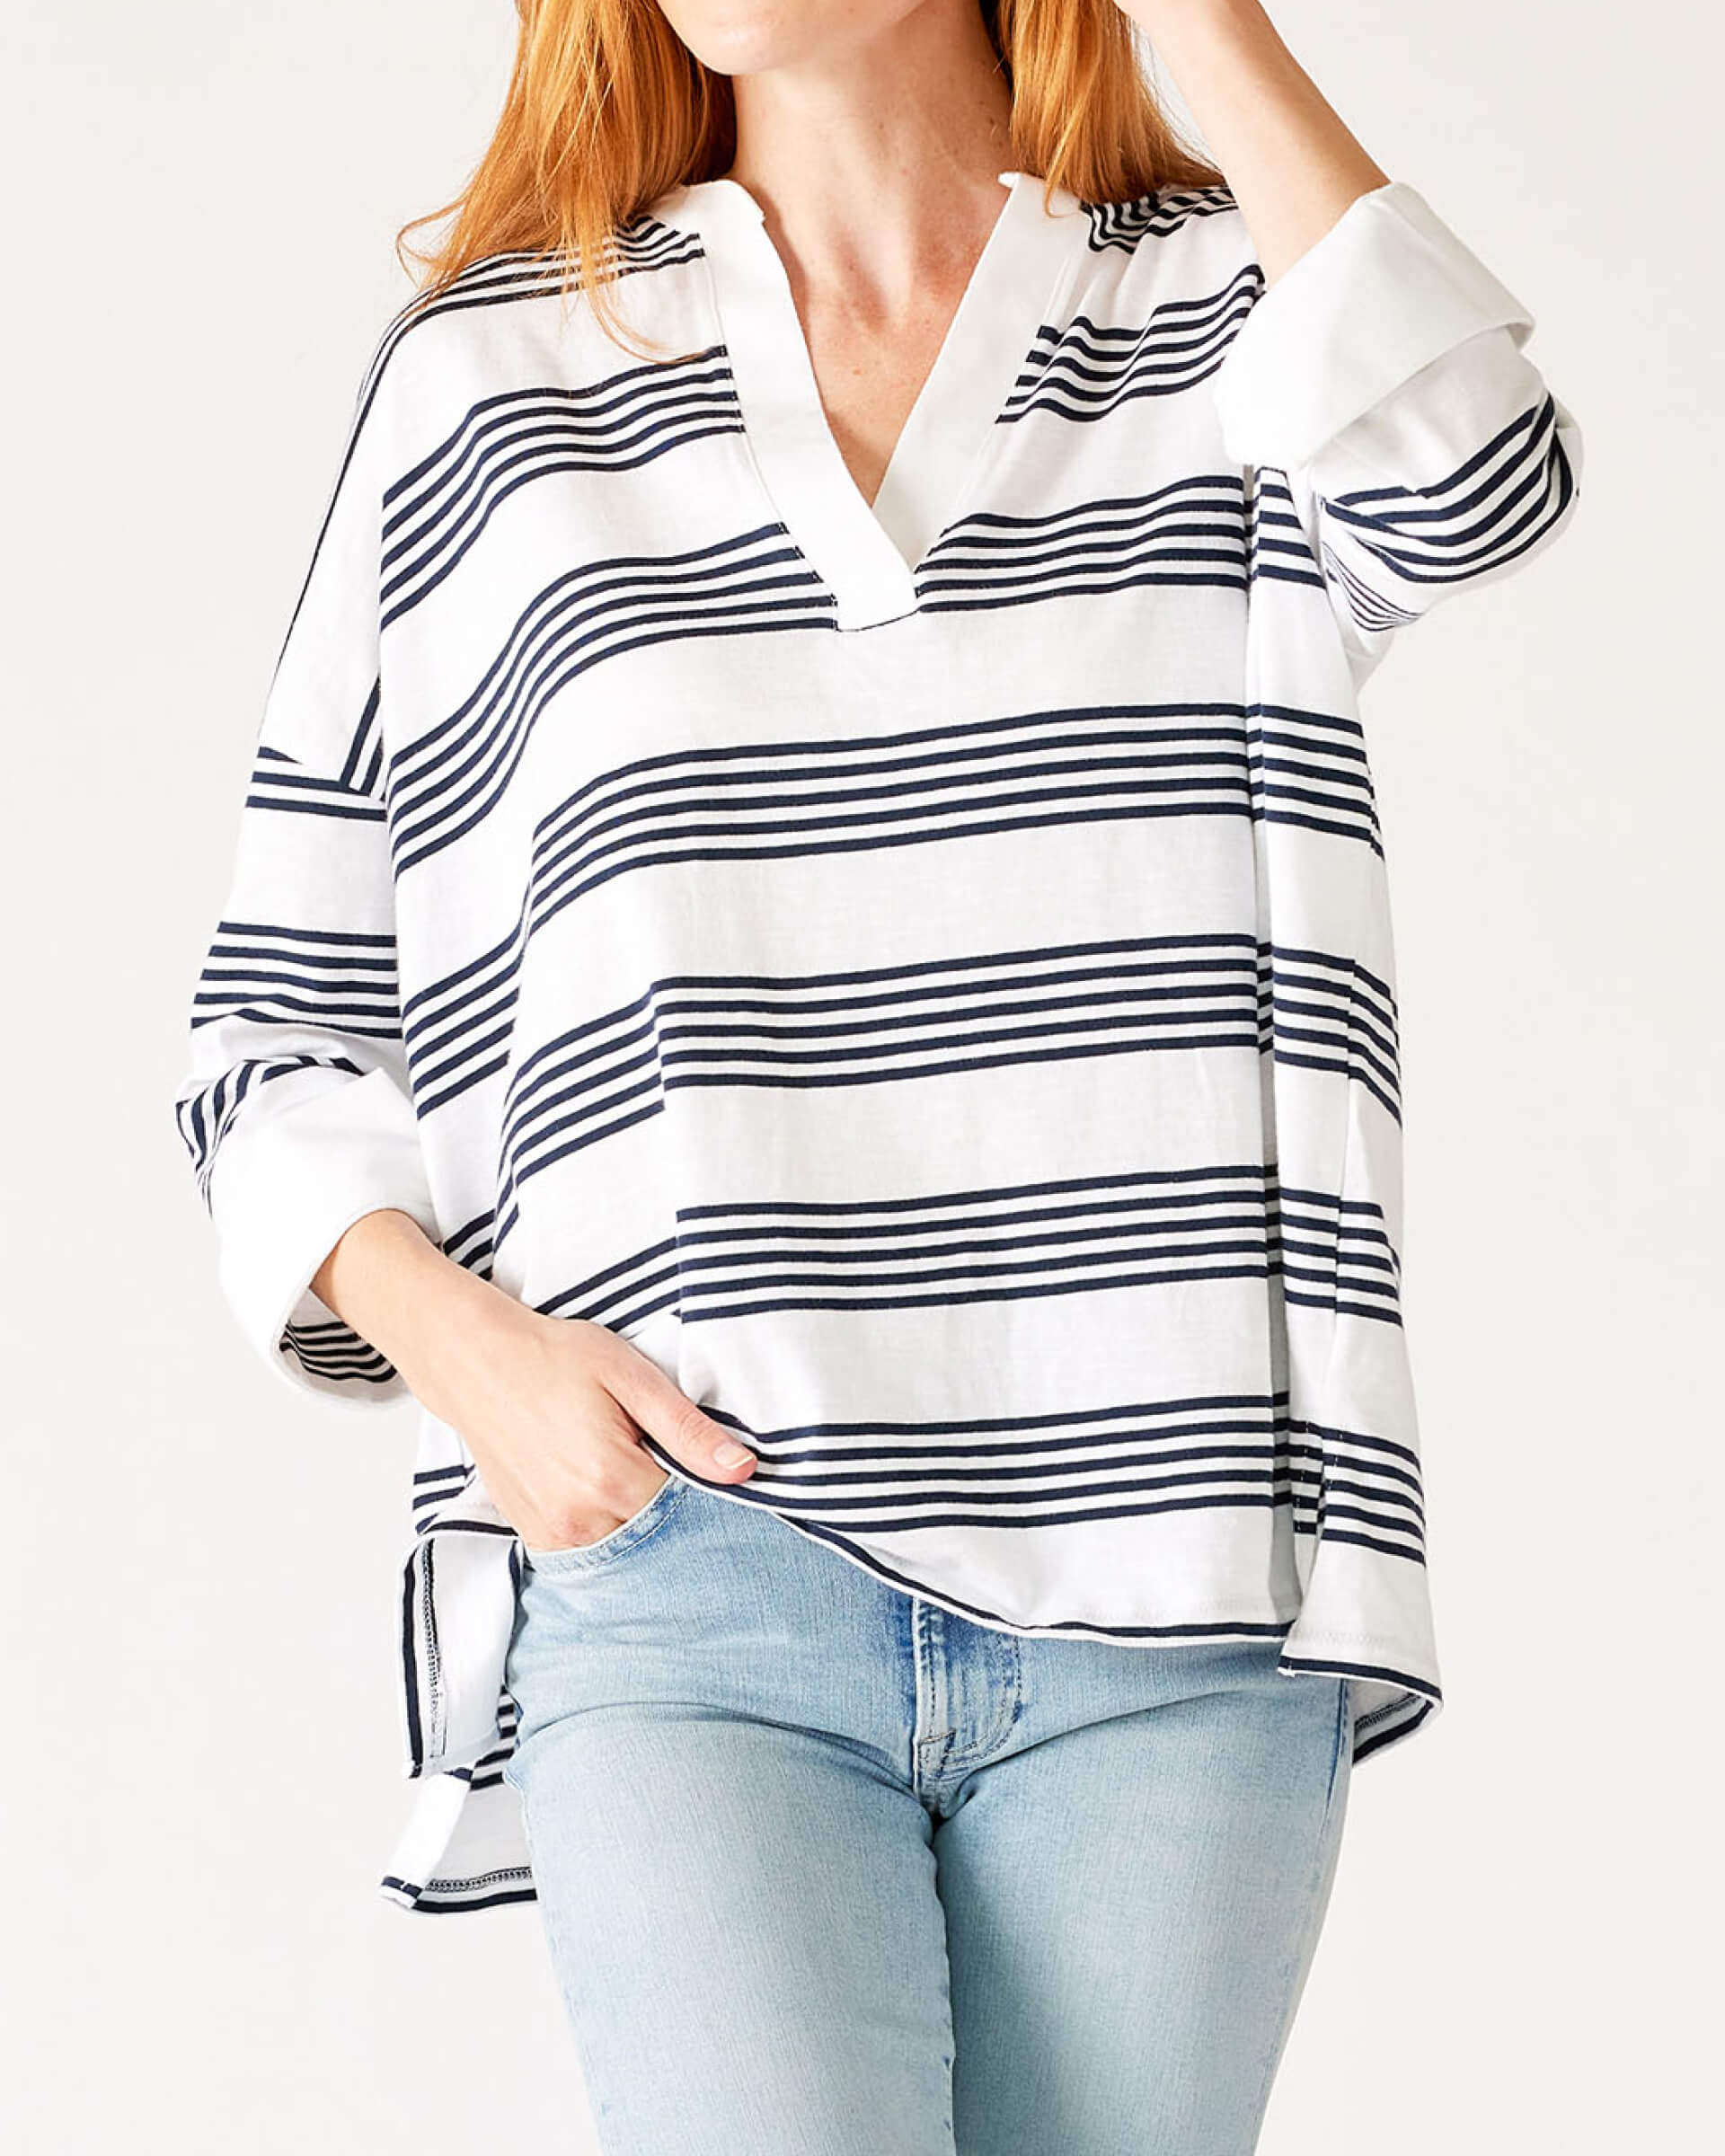 Women's One Size Navy Striped Cuff Tee Chest View